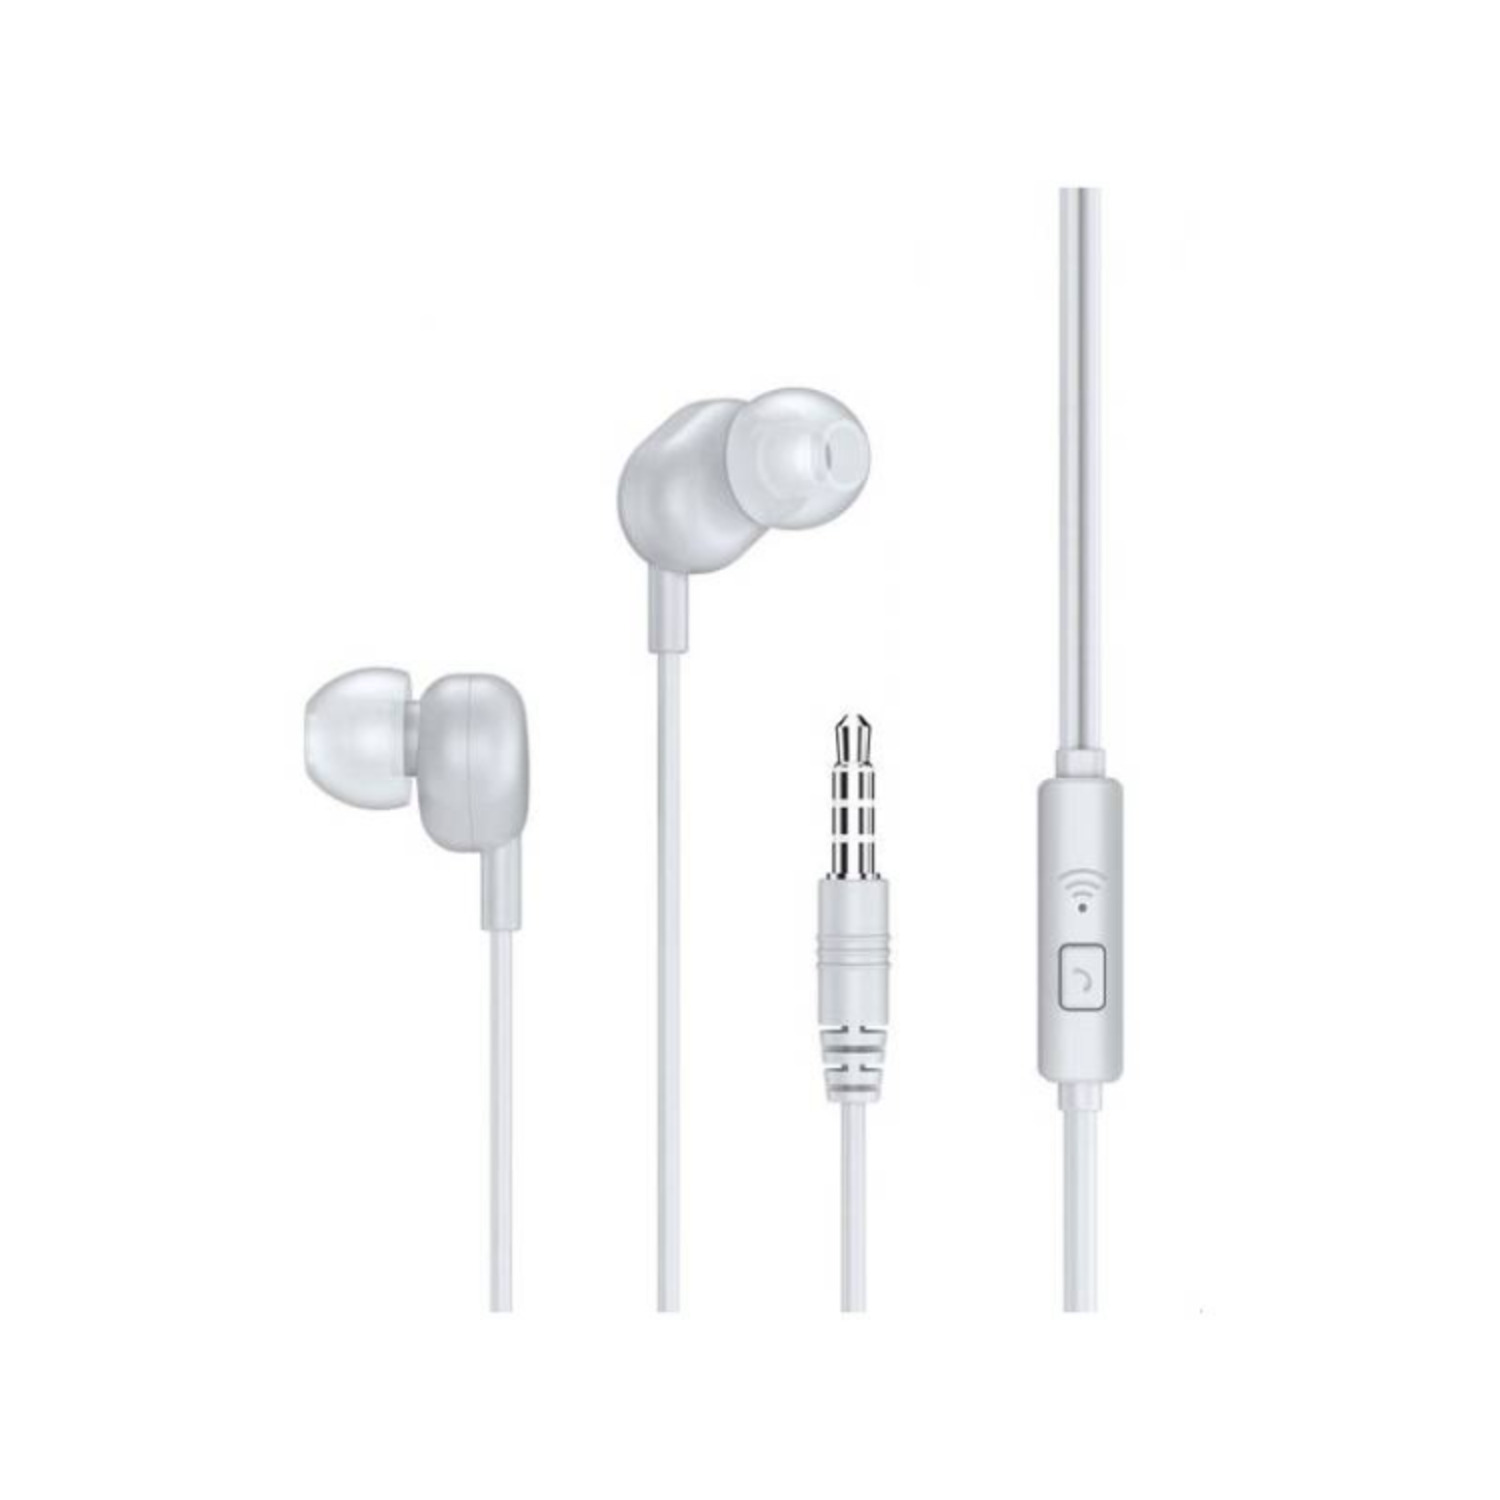 REMAX RW-105 HI-RES AUDIO WIRED STEREO EARPHONES WITH ONE-BUTTON CONTROL - WHITE